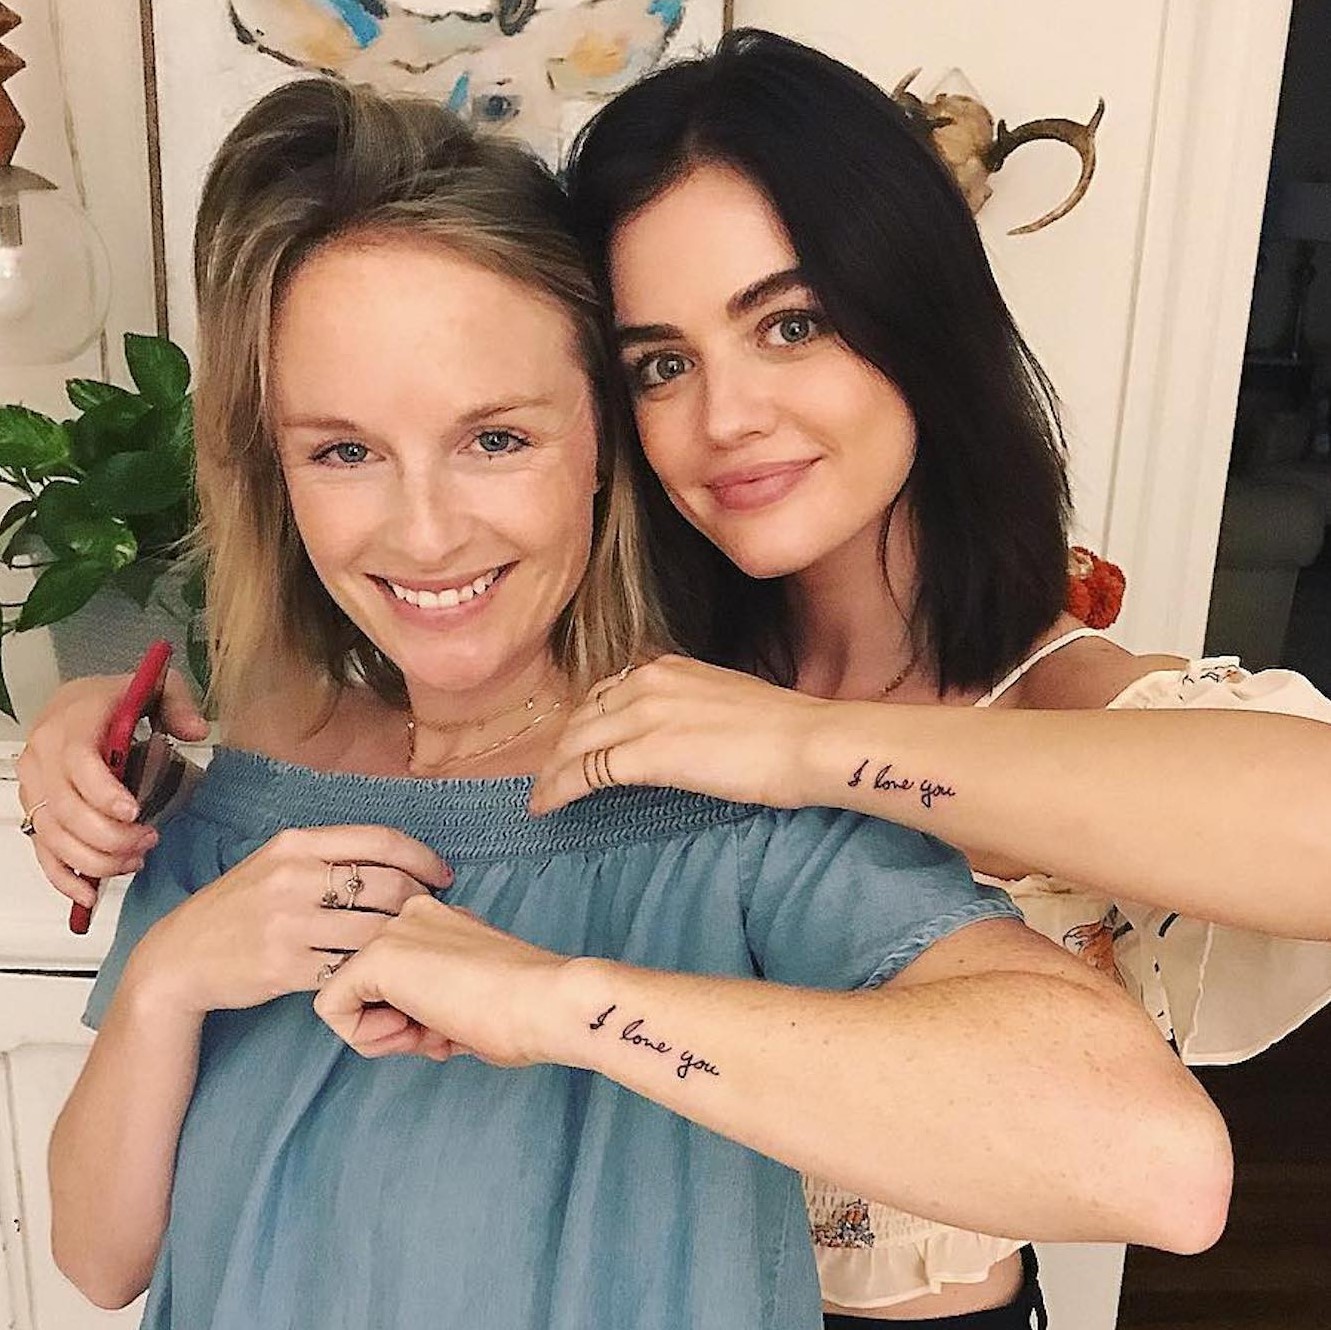 ‘I’m Sorry’: Lucy Hale Removing Matching Tattoo She Got With Her Sister.